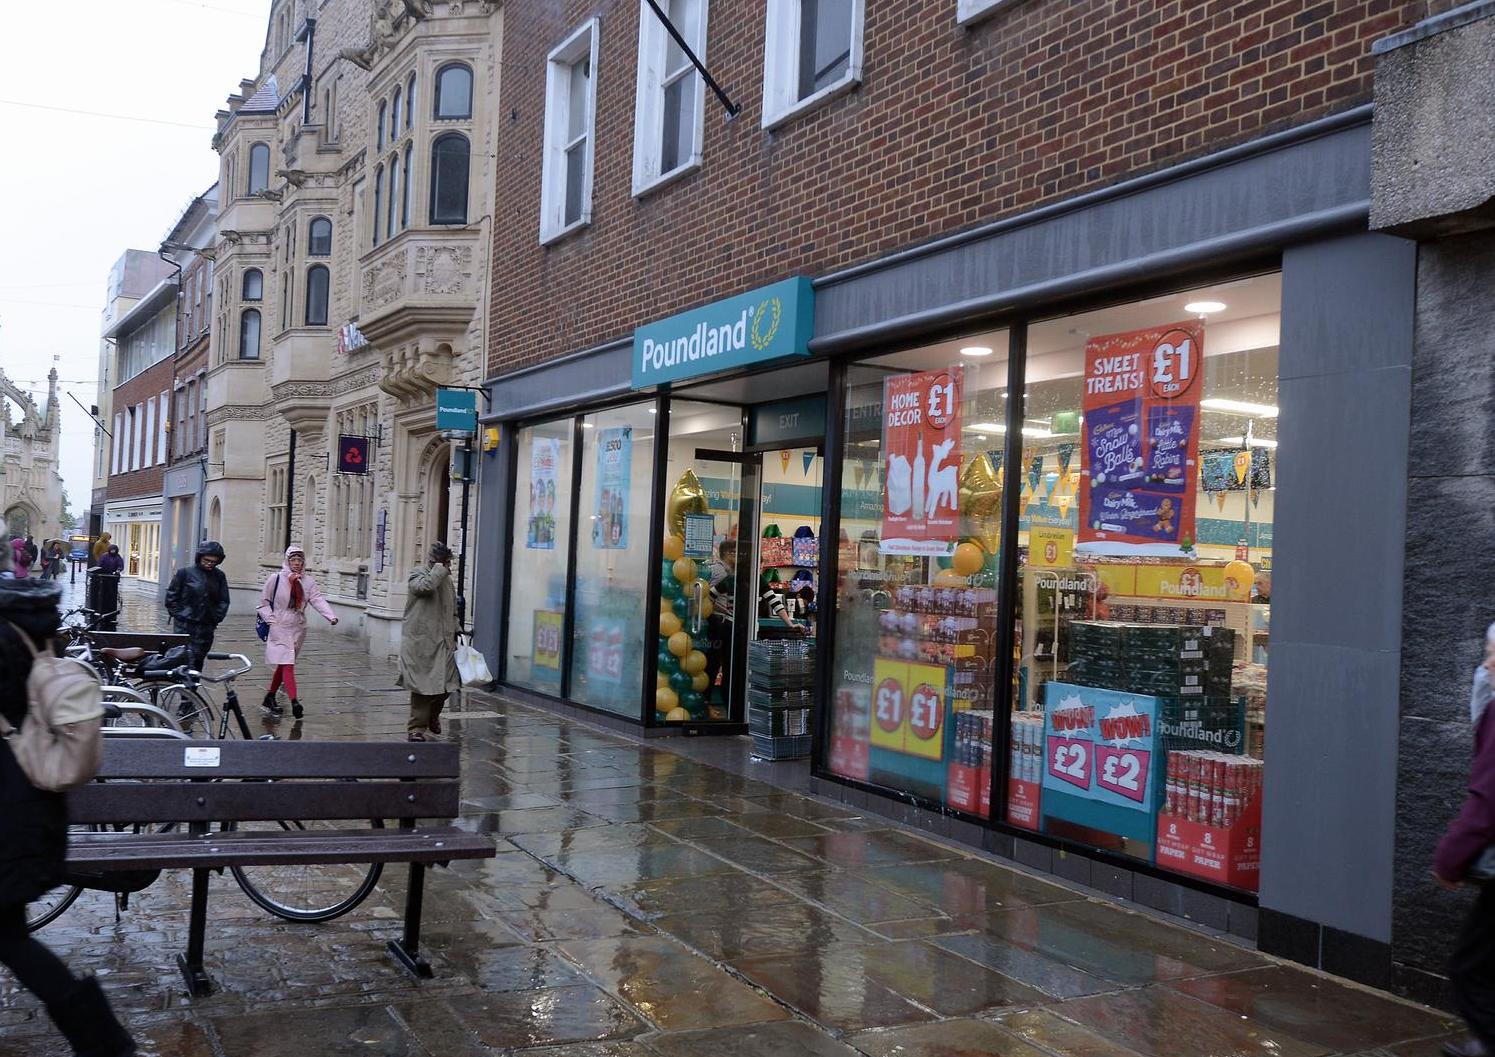 The new Poundland store opened in East Street earlier this month. Kate Shemilt ks190599-3